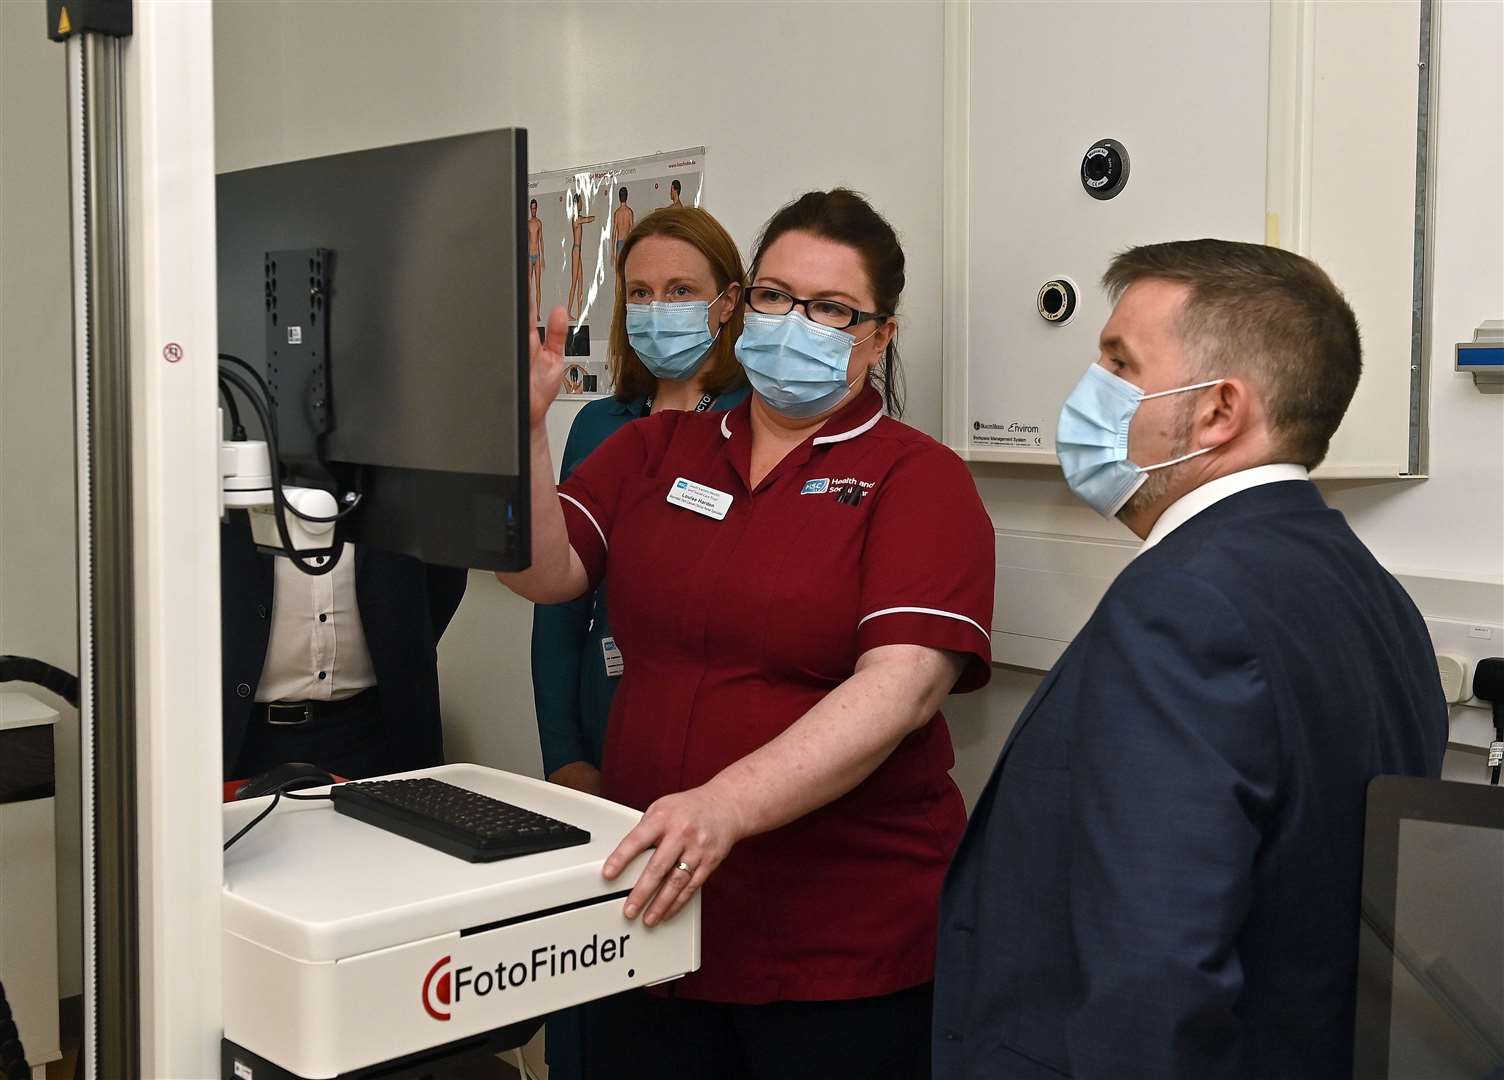 Health Minister Robin Swann at the launch of a new mole mapping service at the Ulster Hospital in Dundonald (Oliver McVeigh/PA)